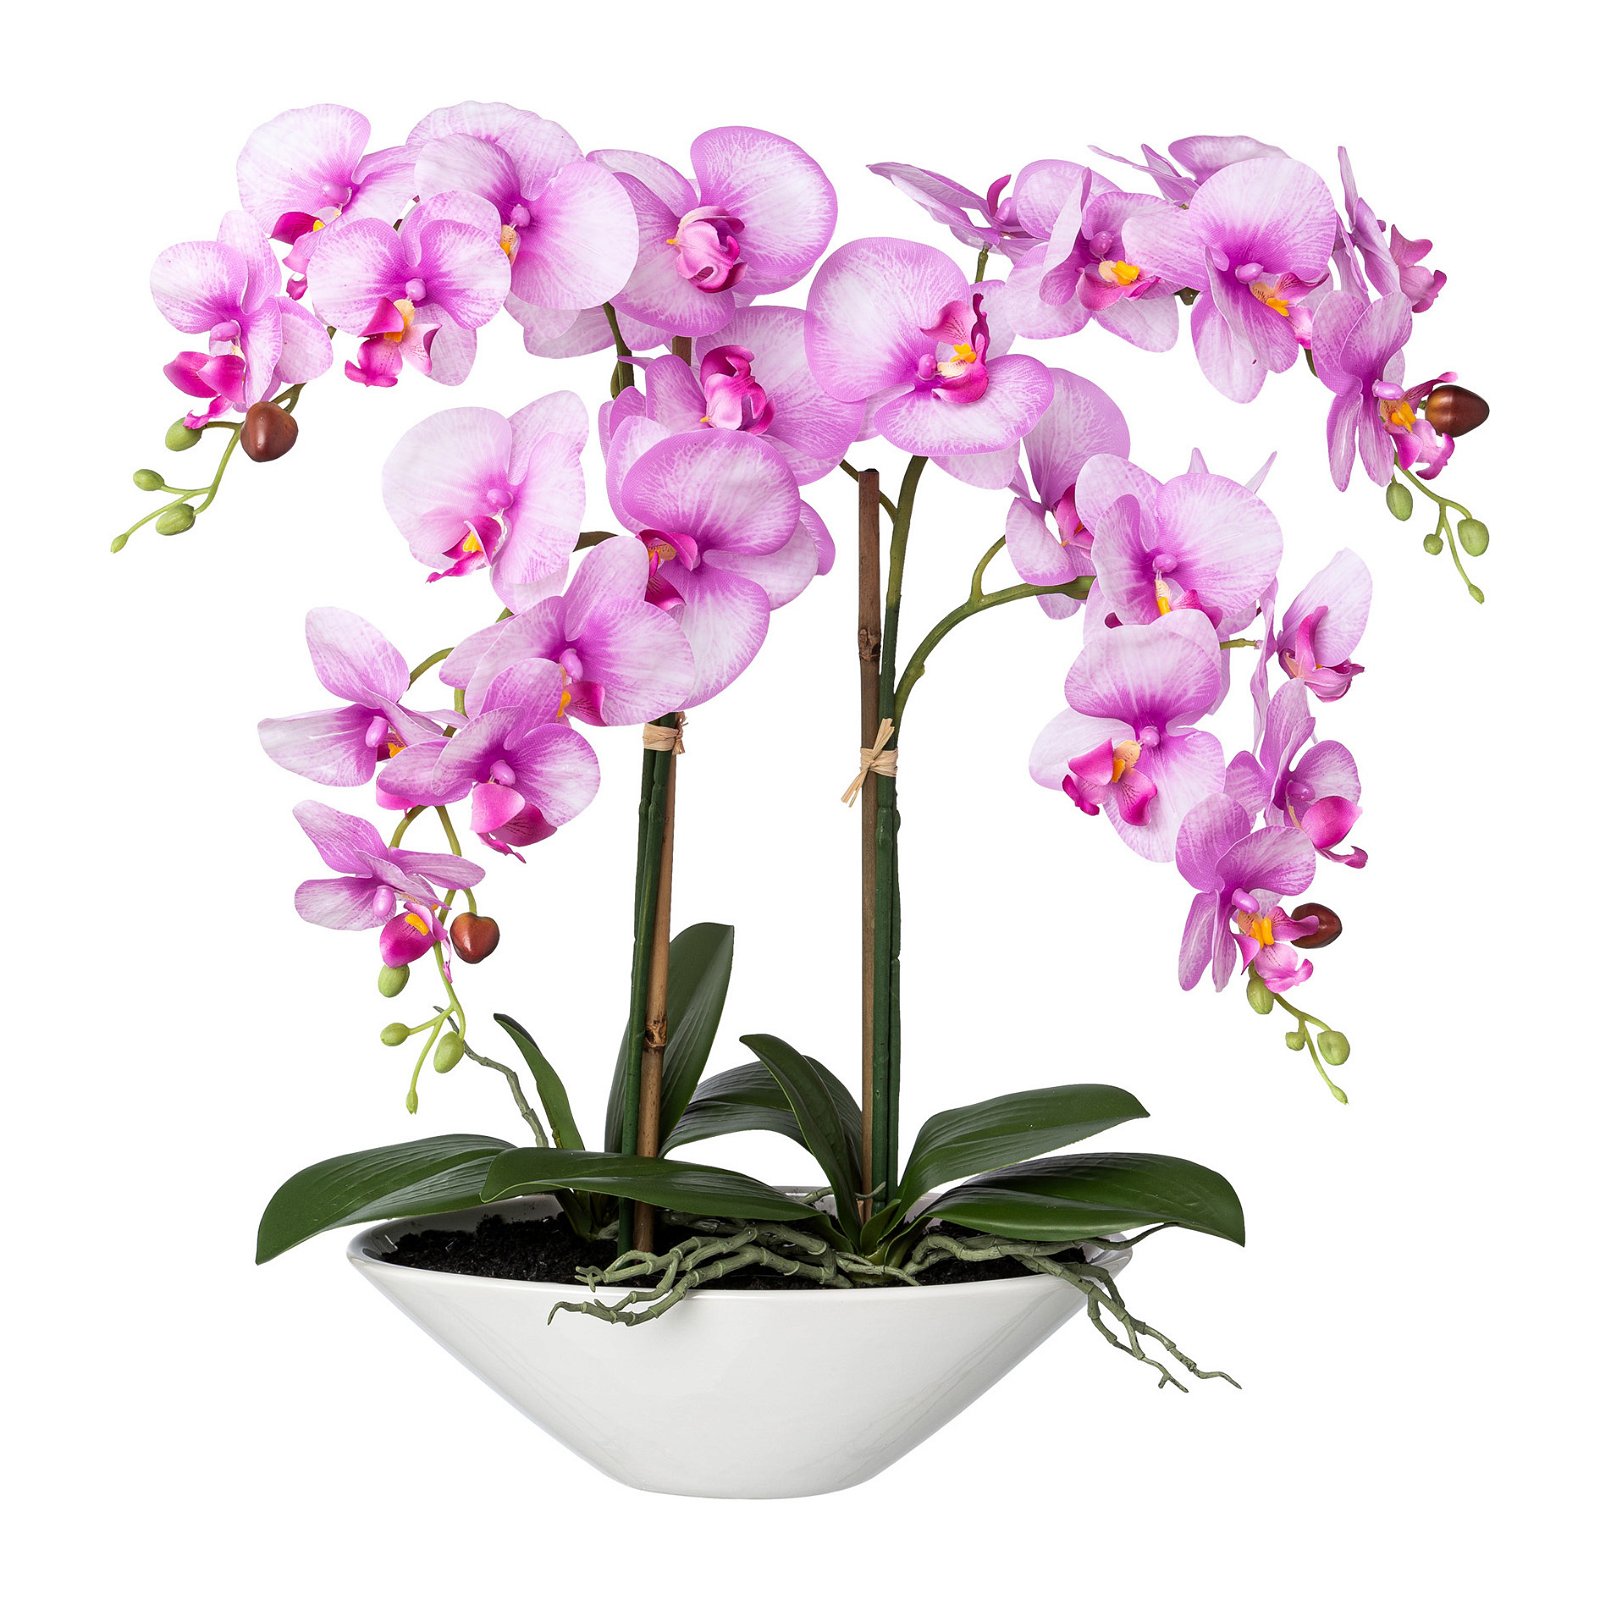 Kunstpflanze Phalaenopsis 'Real Touch', orchidee, Höhe ca. 53 cm